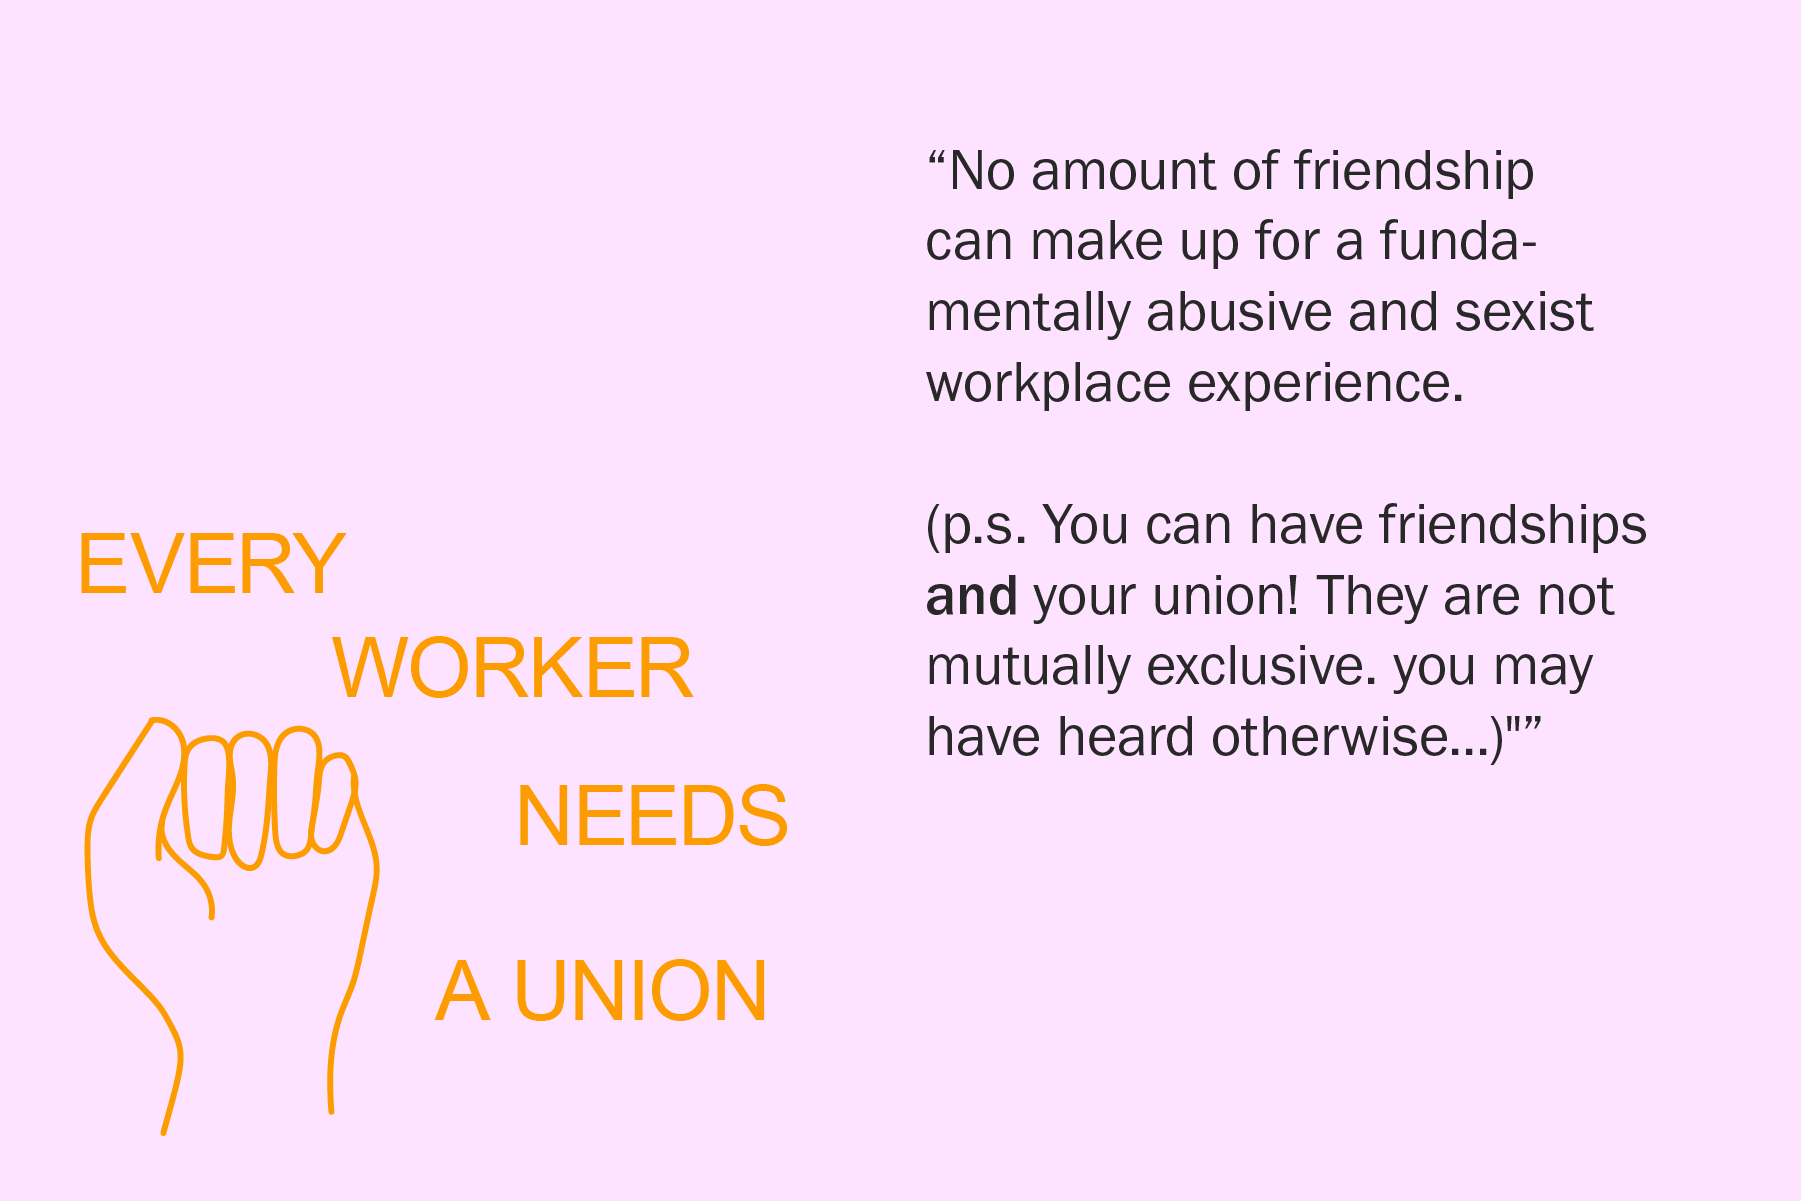 No amount of friendship can make up for a fundamentally abusive and sexist workplace experience. (p.s. You can have friendships and your union! They are not mutually exclusive. you may have heard otherwise...)